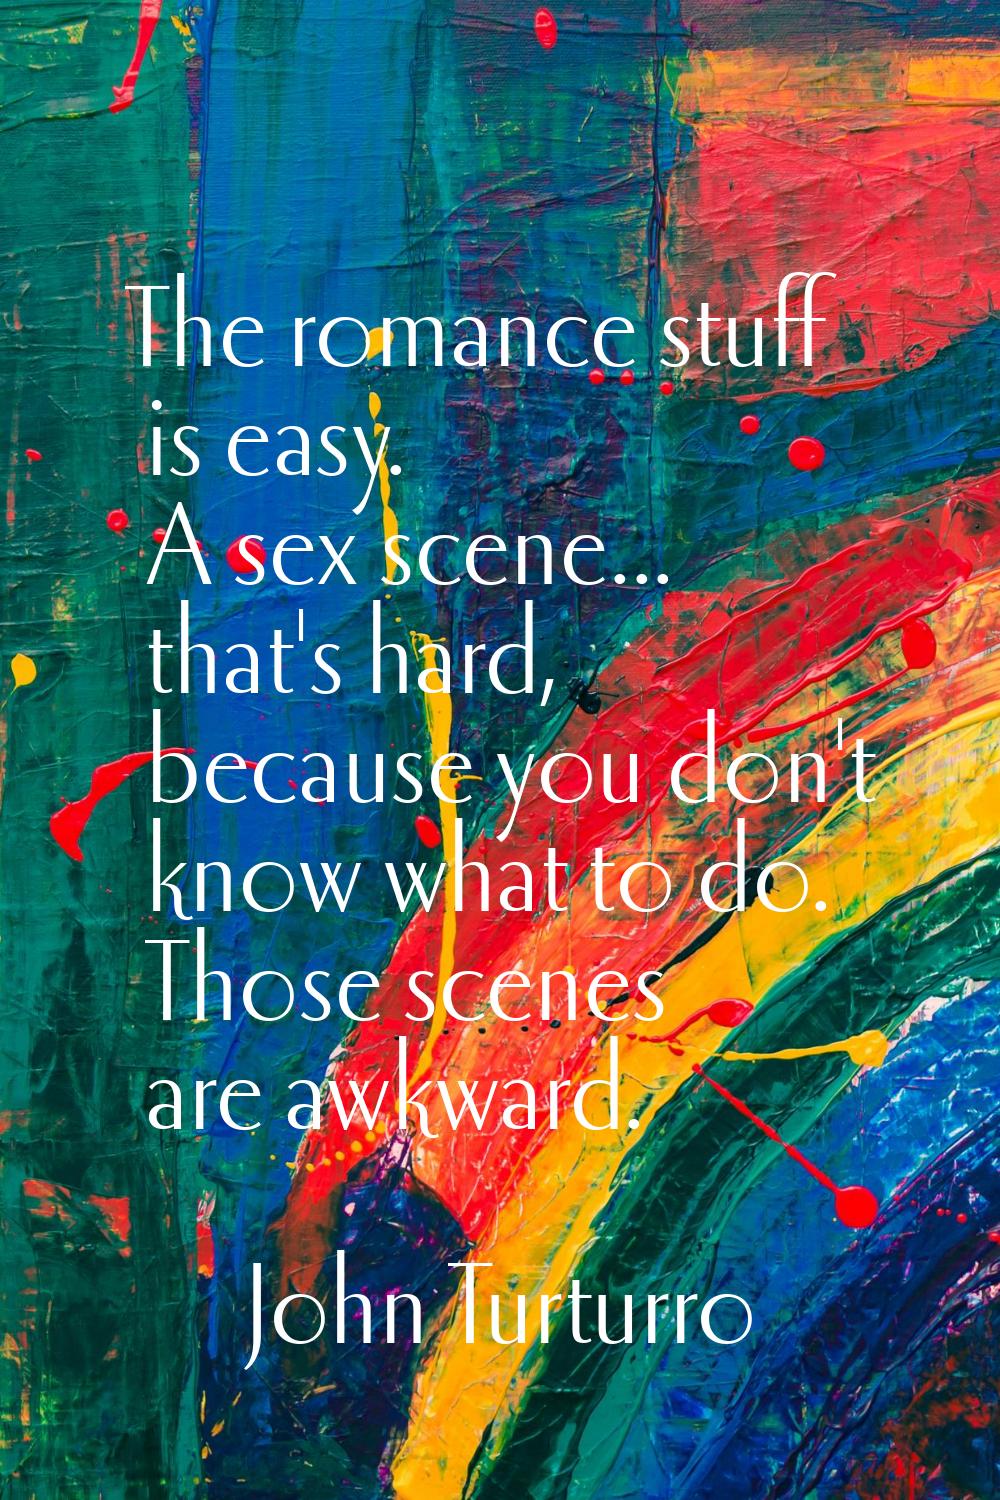 The romance stuff is easy. A sex scene... that's hard, because you don't know what to do. Those sce